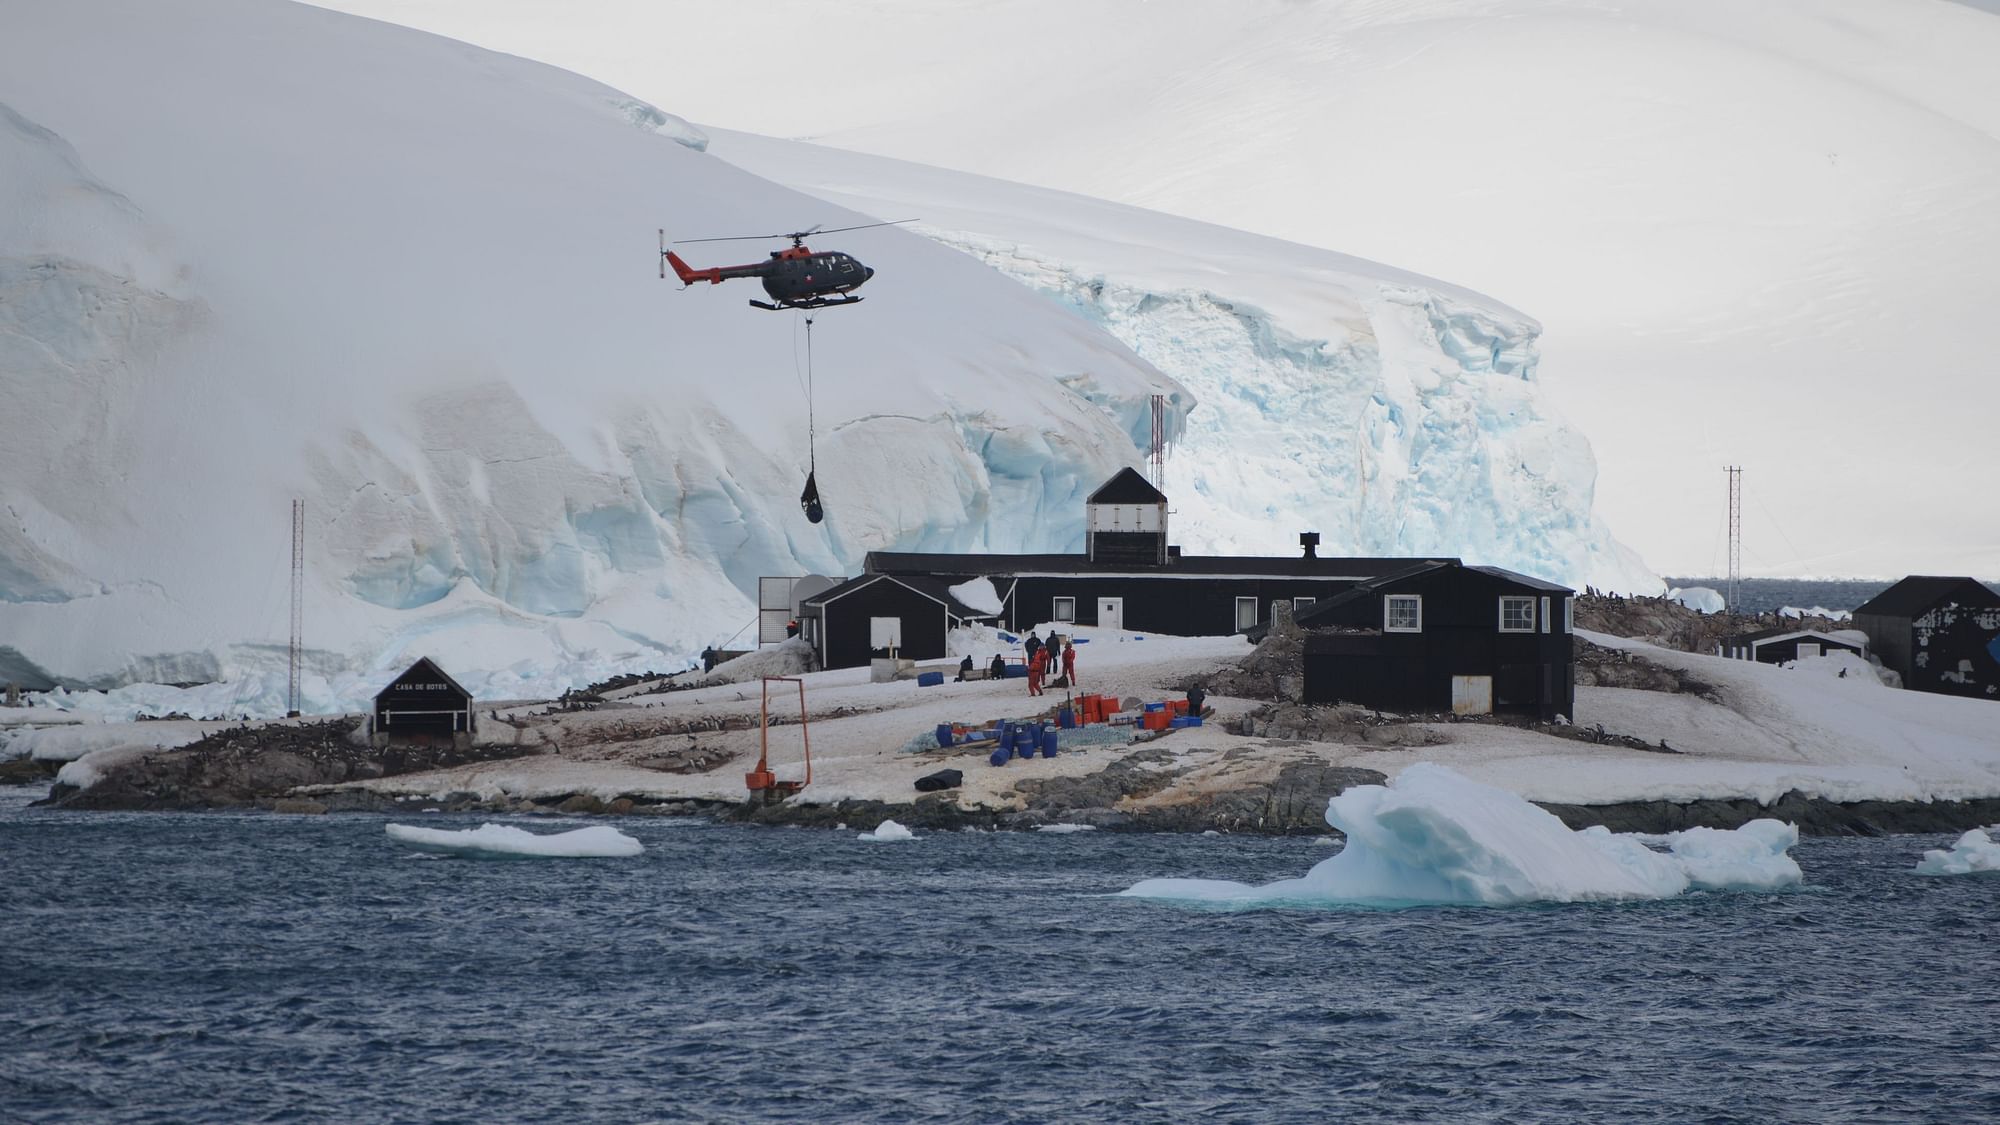 Helicopters delivering fuel to Chile’s González Videla Base on Antarctic Peninsula.